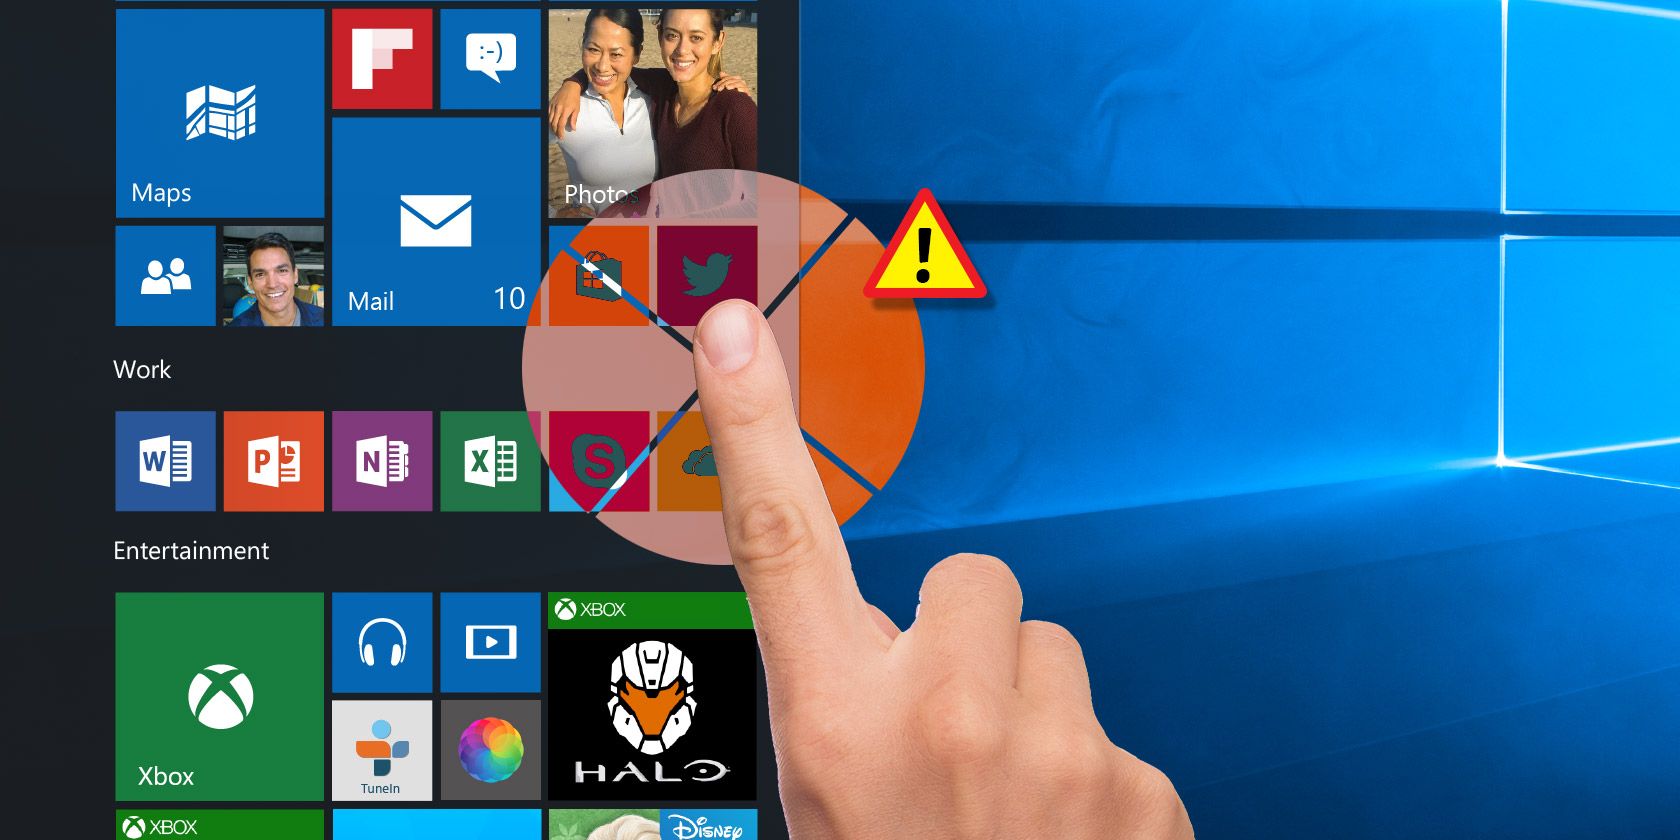 How to Fix Your Windows 10 Touchscreen Not Working